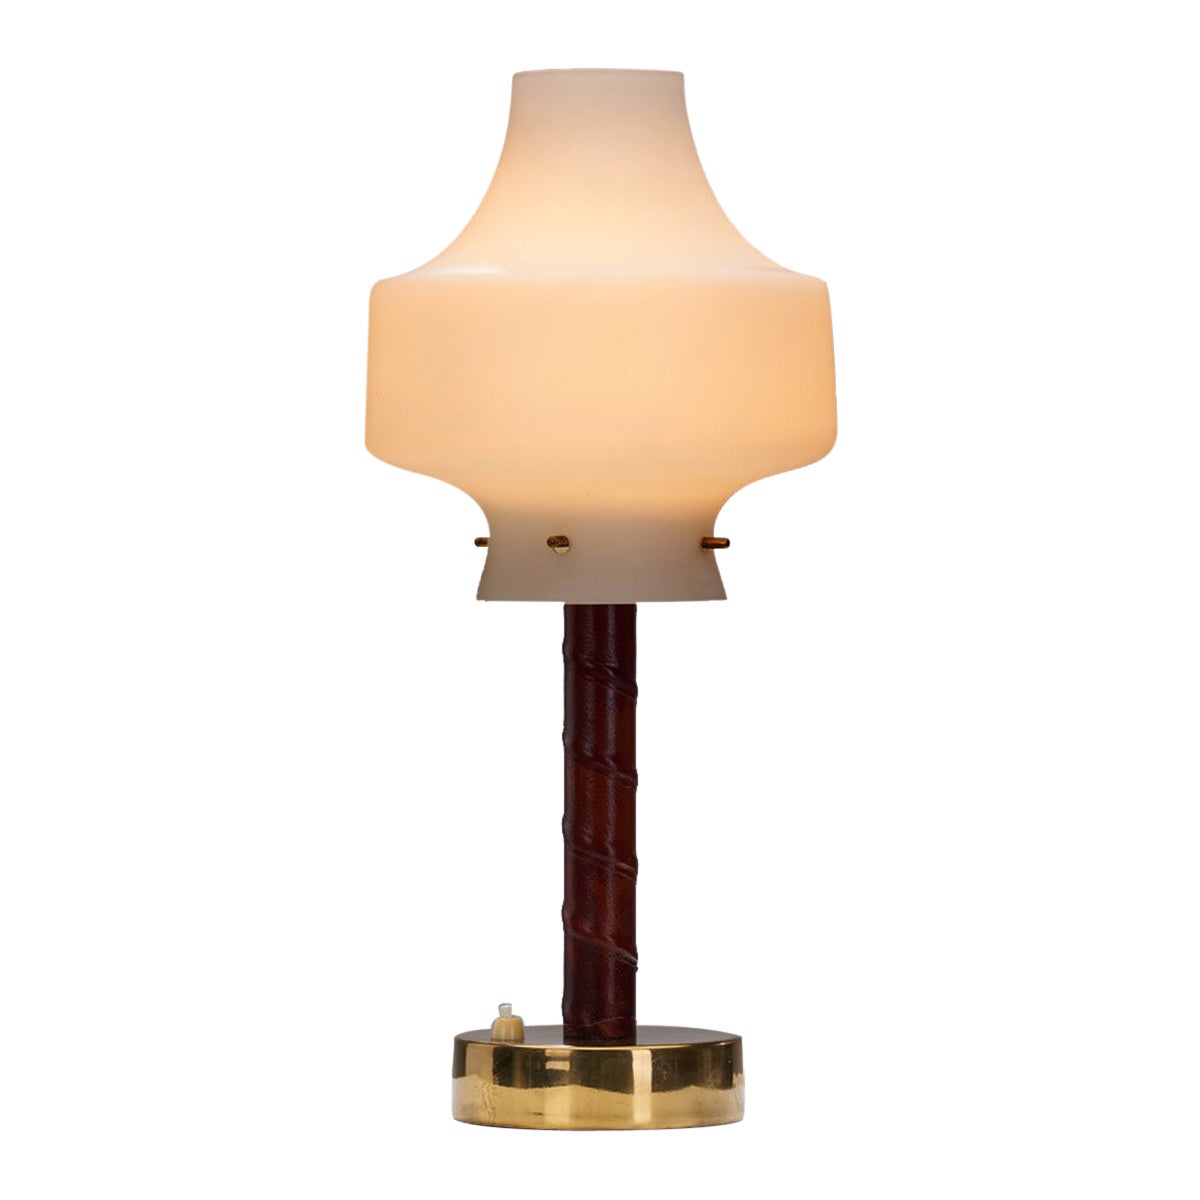 Model "E 1339" Table Lamp from Asea, Sweden ca 1950s